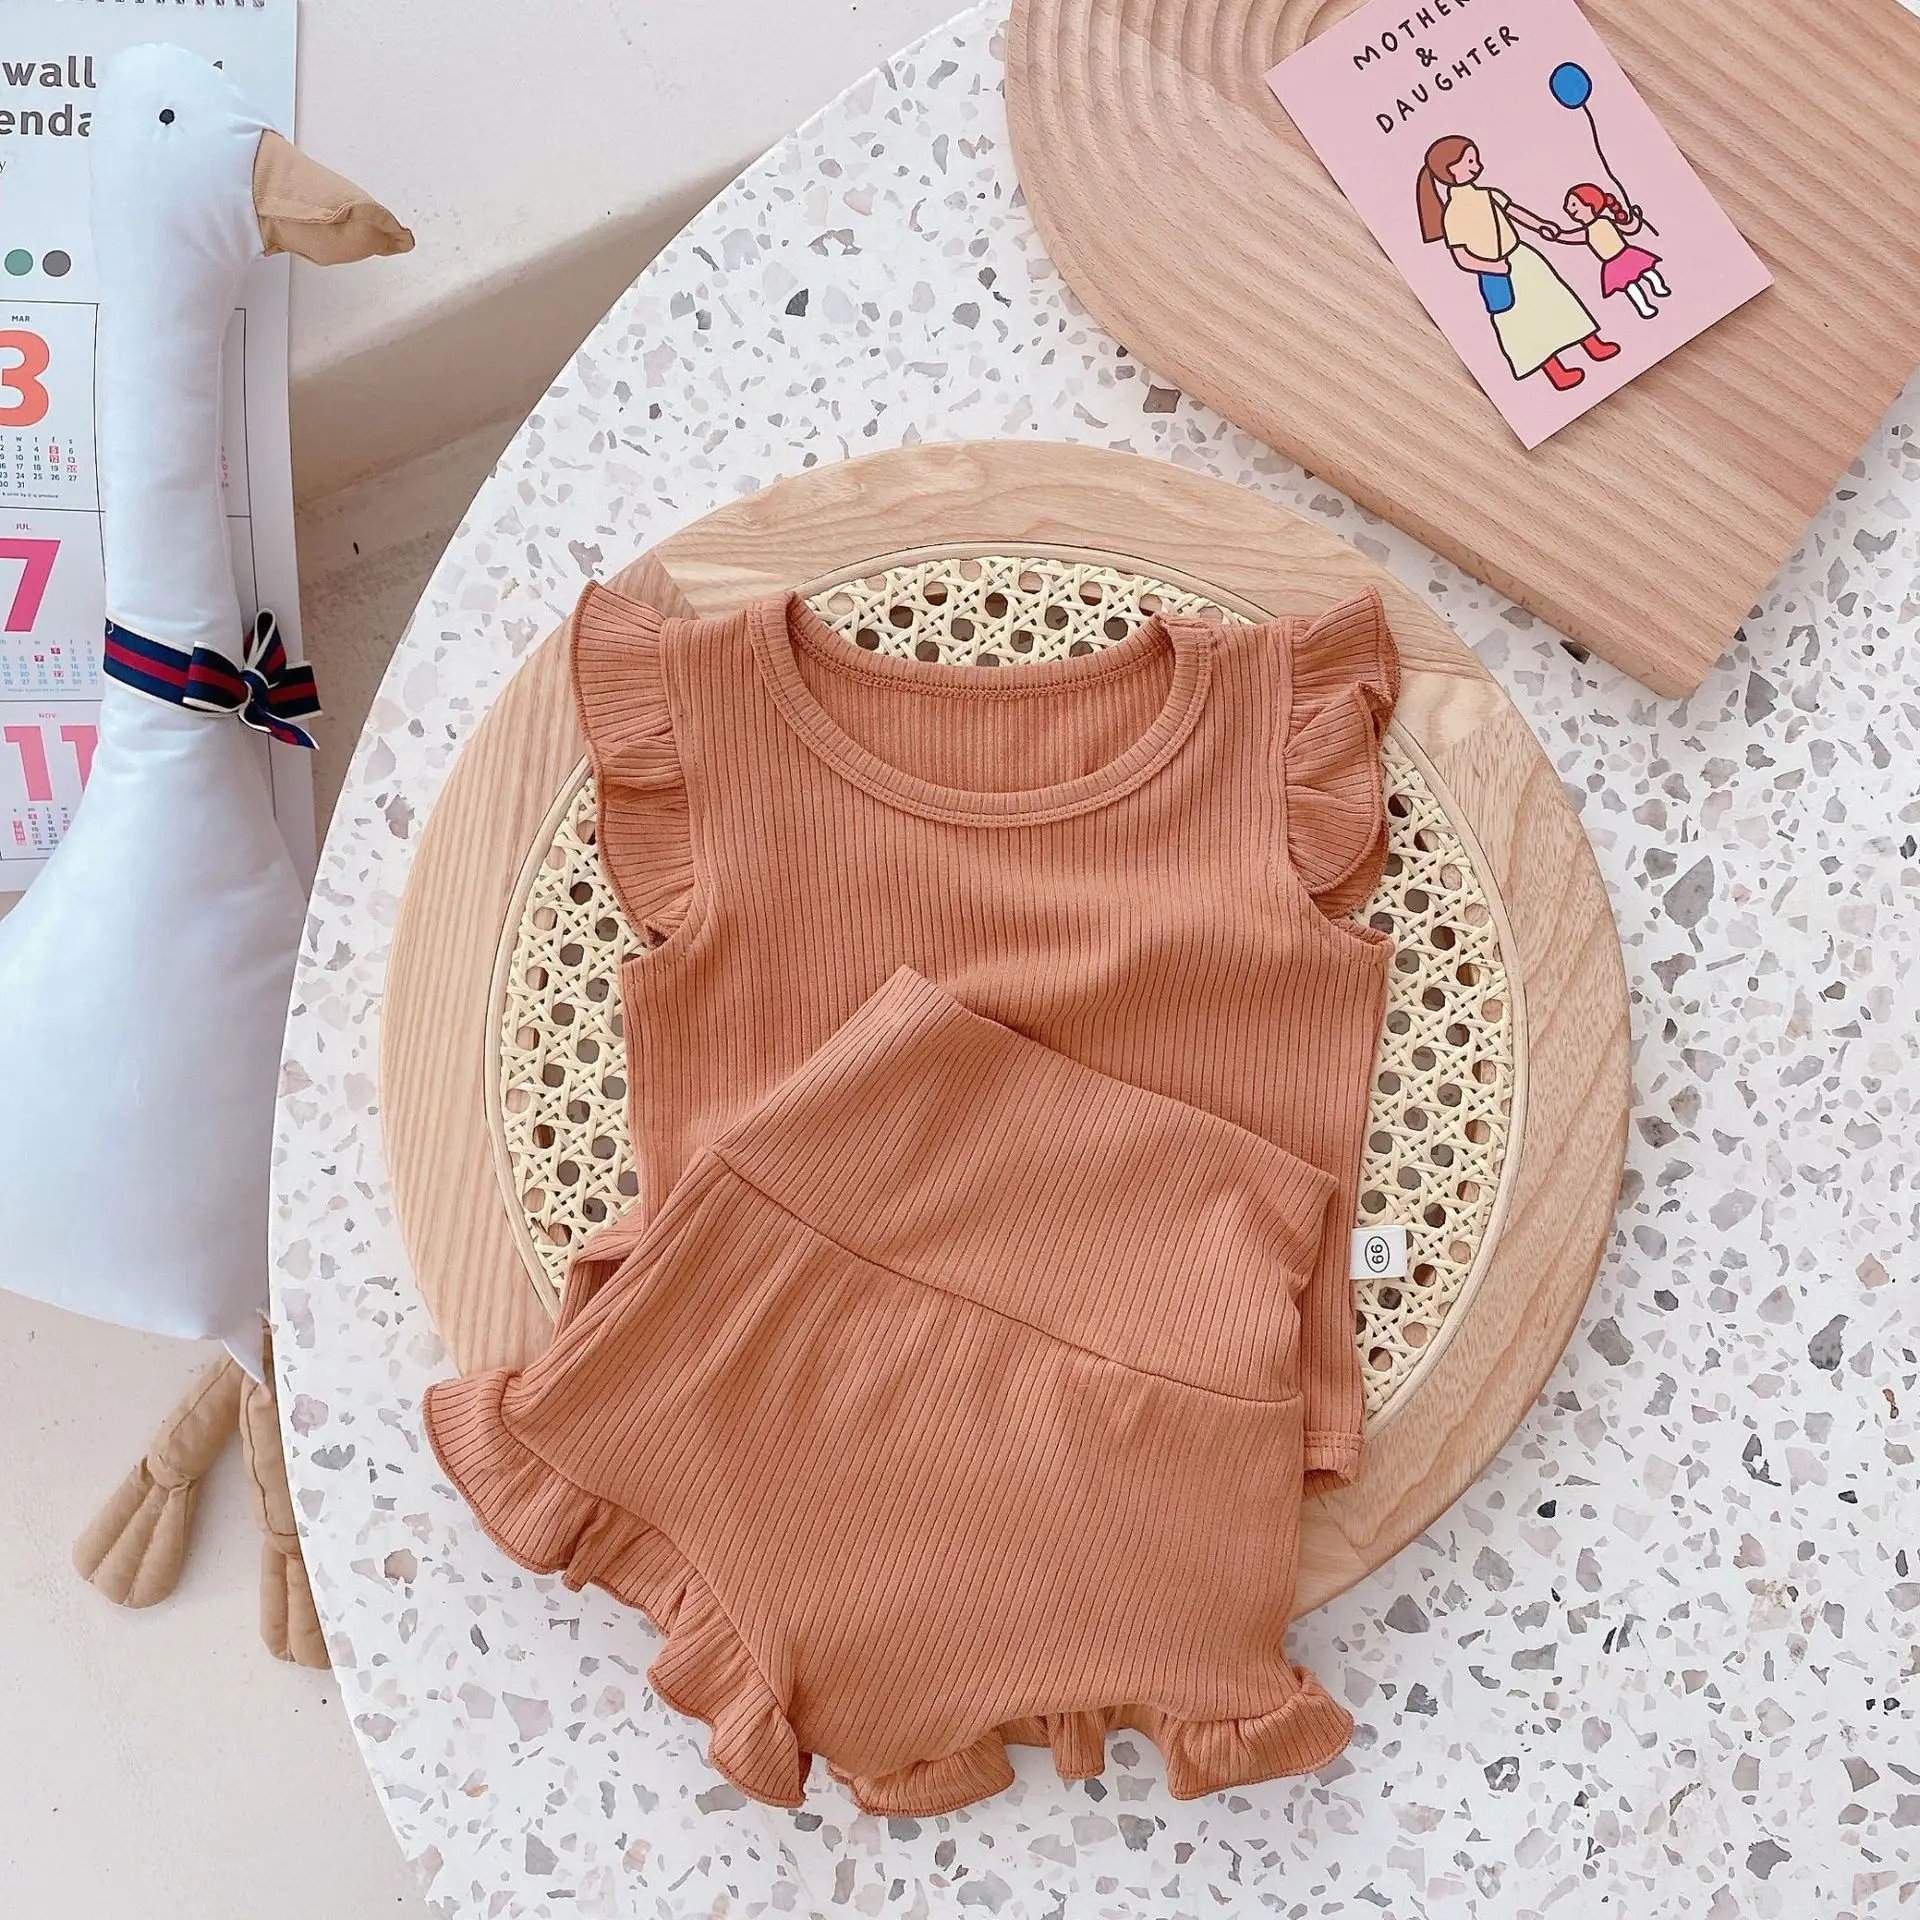 

New arrival summer baby clothes set ribbed newborn clothing flutter sleeve bloomers baby toddler girls outfits, Accept customized color